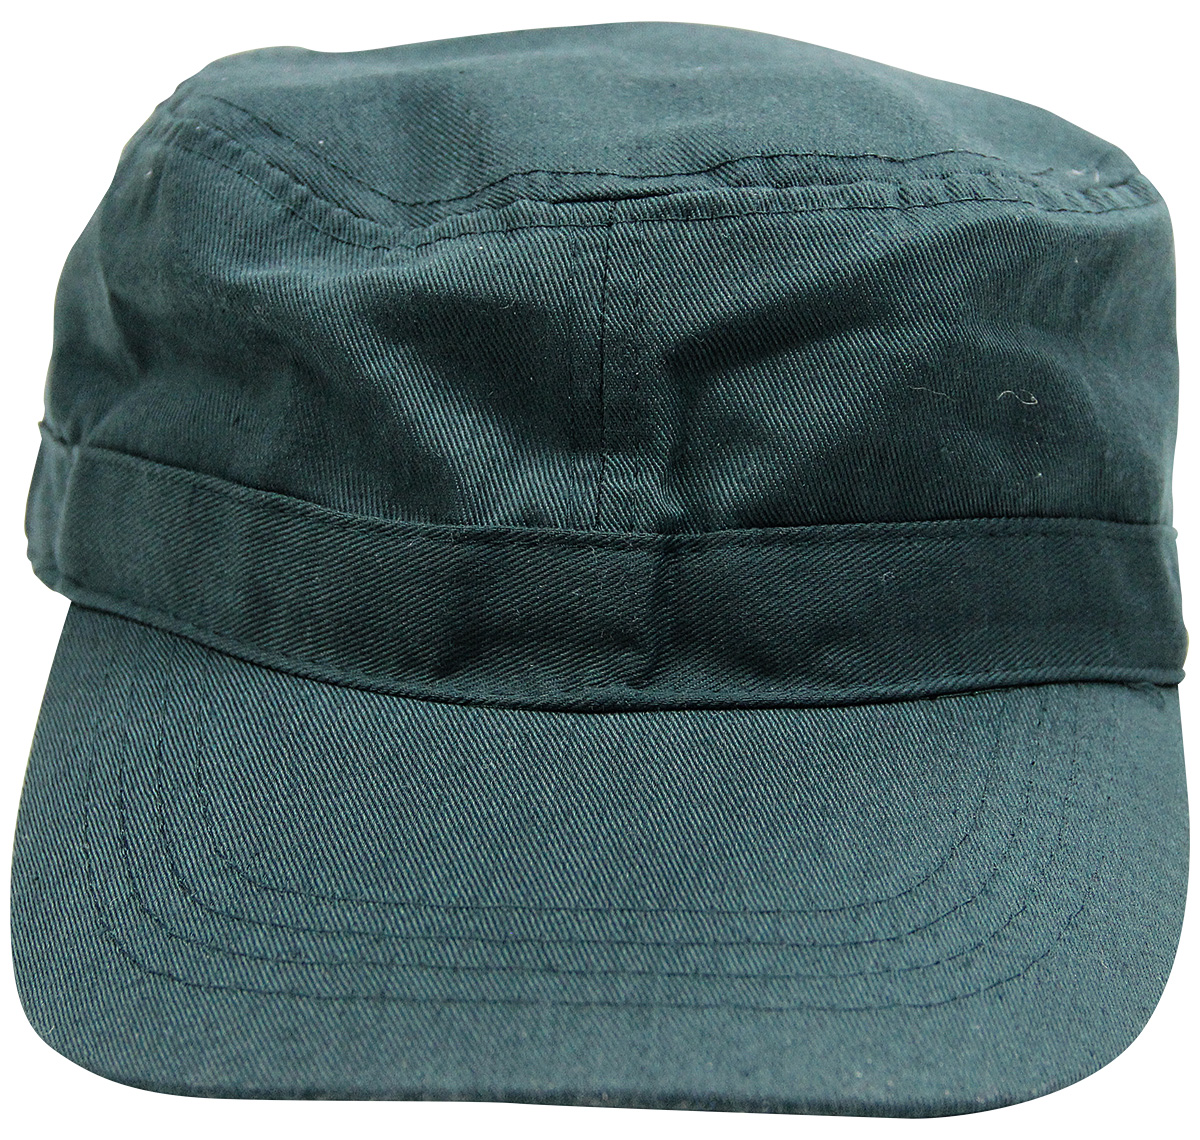 Closeouts :: Canvas :: Canvas Military Cap | Forest Green